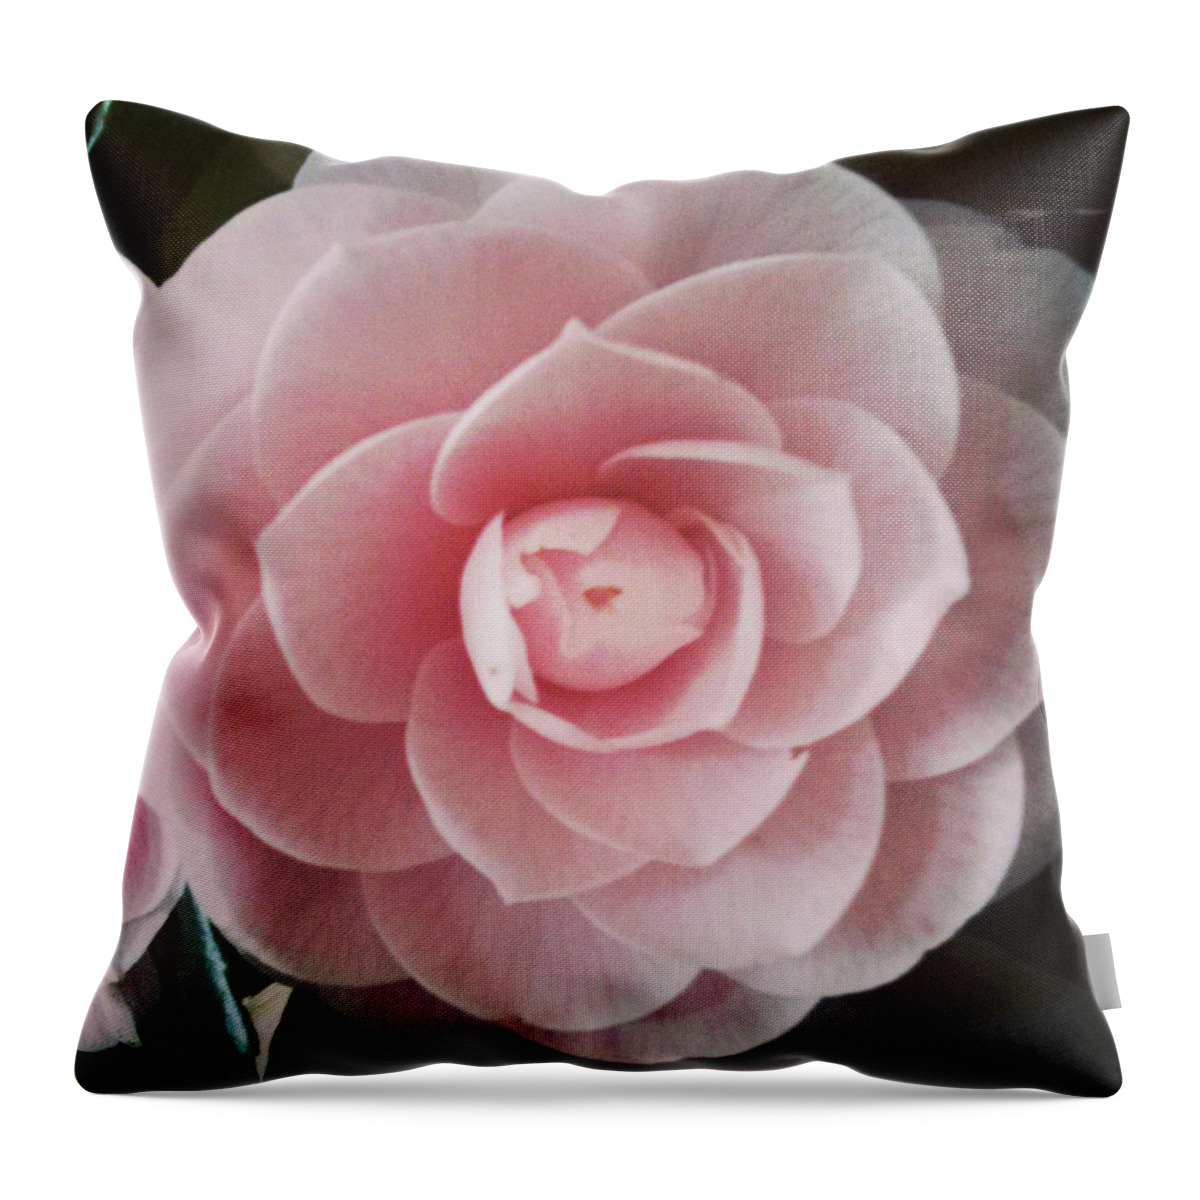 Rose Throw Pillow featuring the photograph A Rose Is A Rose Is A Rose by Michael Merry